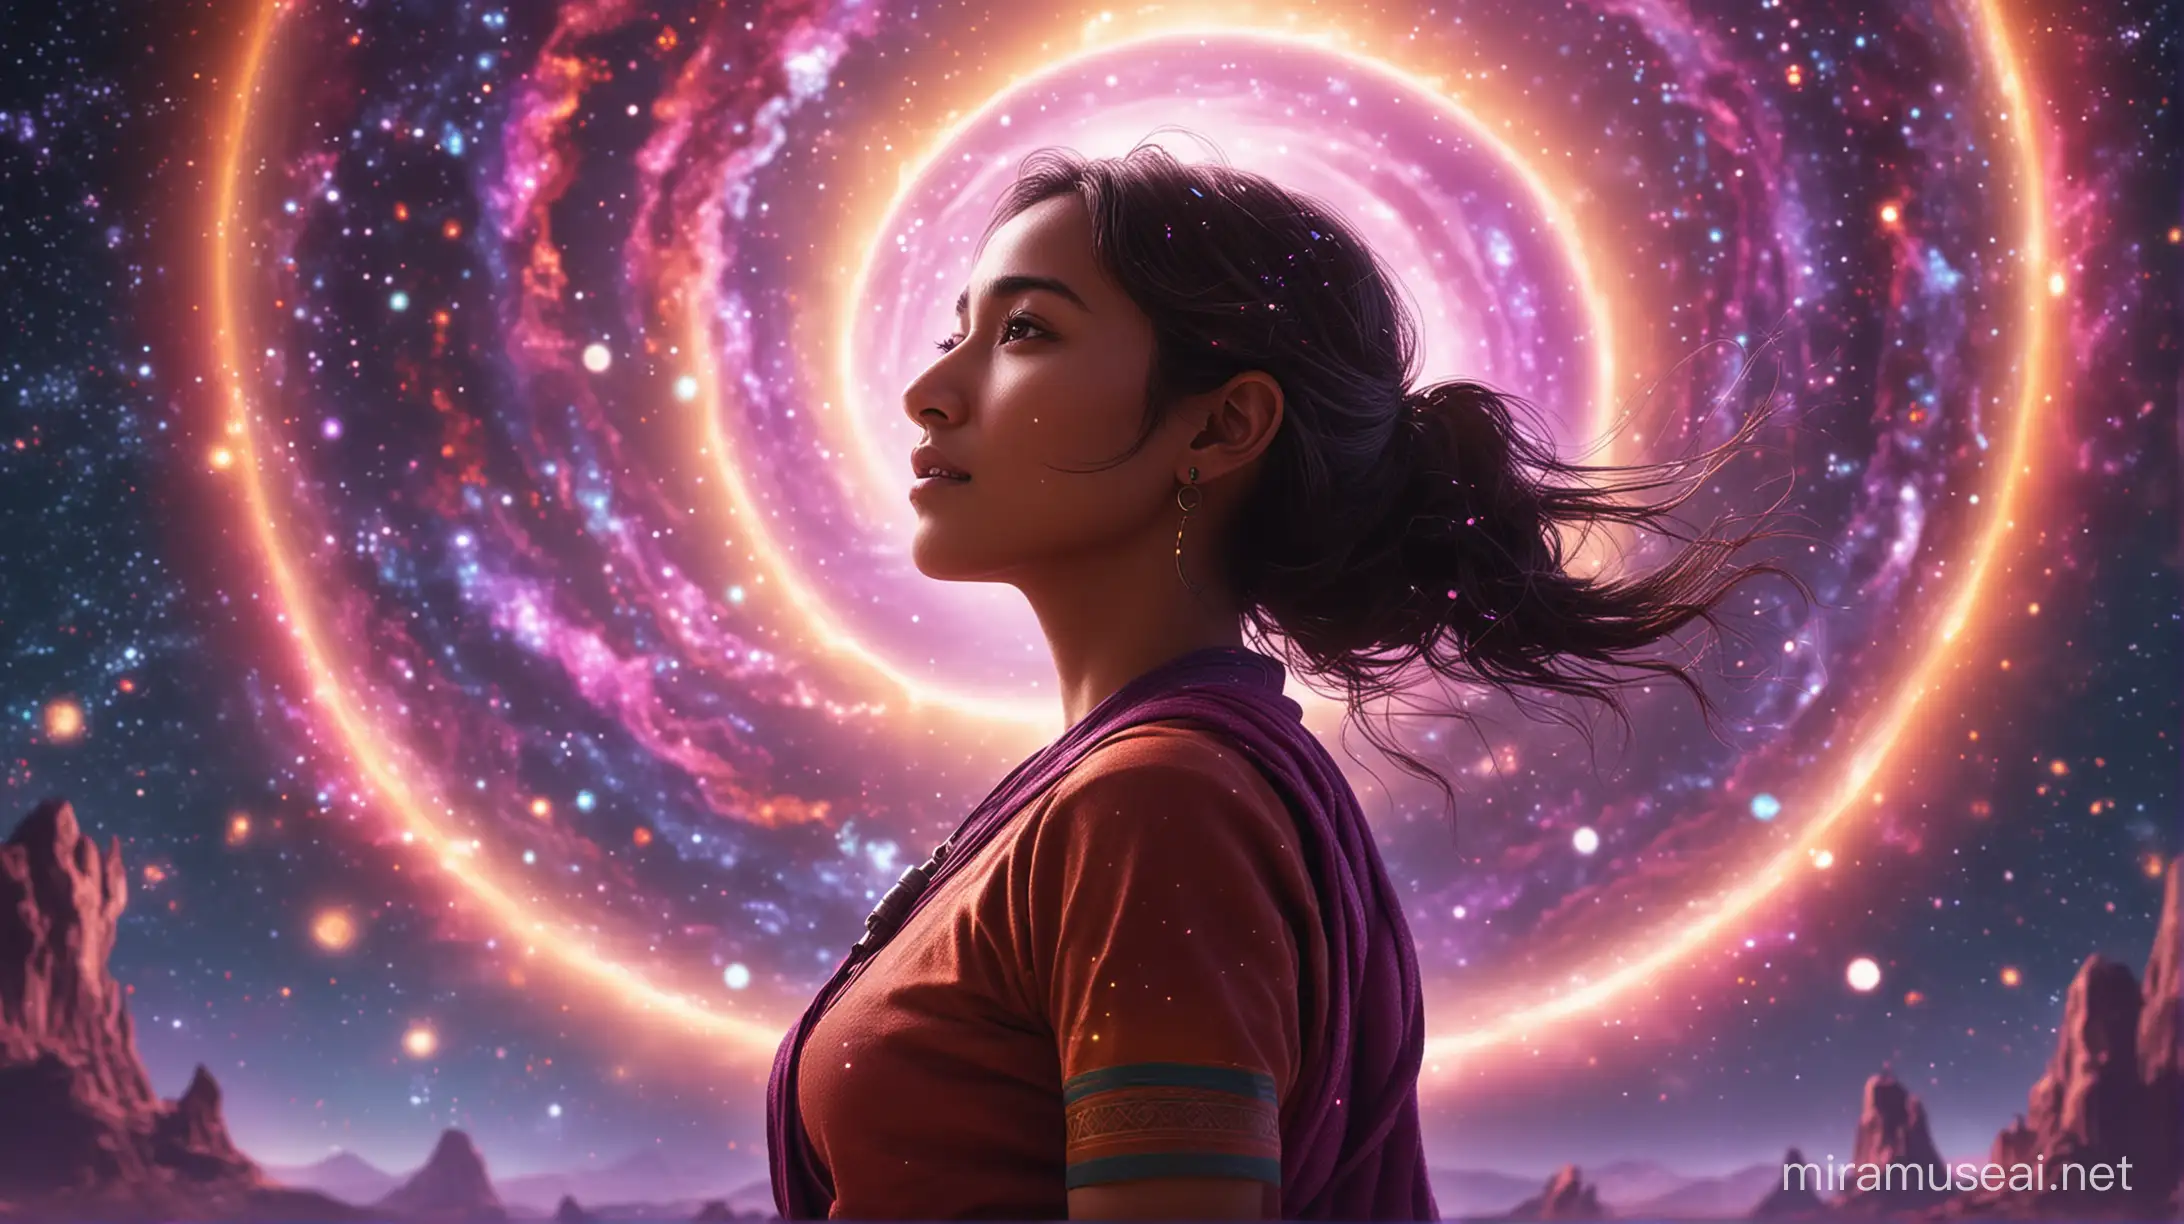 a person mix asian indian increasing Vibration & experiencing journey 
health and heal, and being surrounded by beautiful colors, galaxy imagination. backlight photography, CG characters, 32K, high resolution, super-realistic